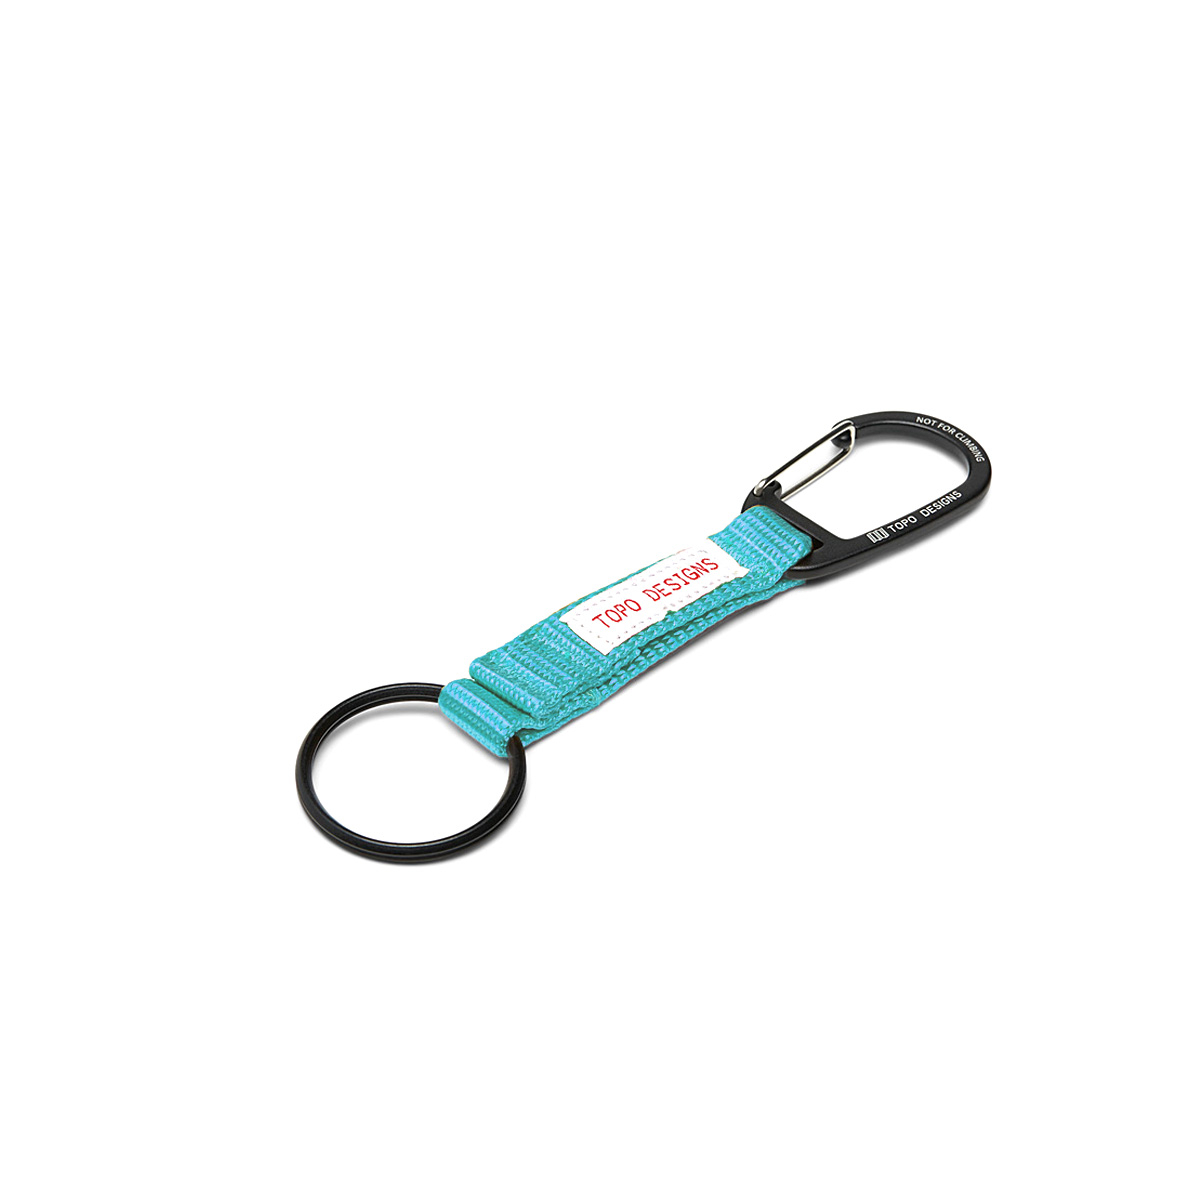 Topo Designs Key Clip Turquoise, keep keys handy and visible with the Key Clip